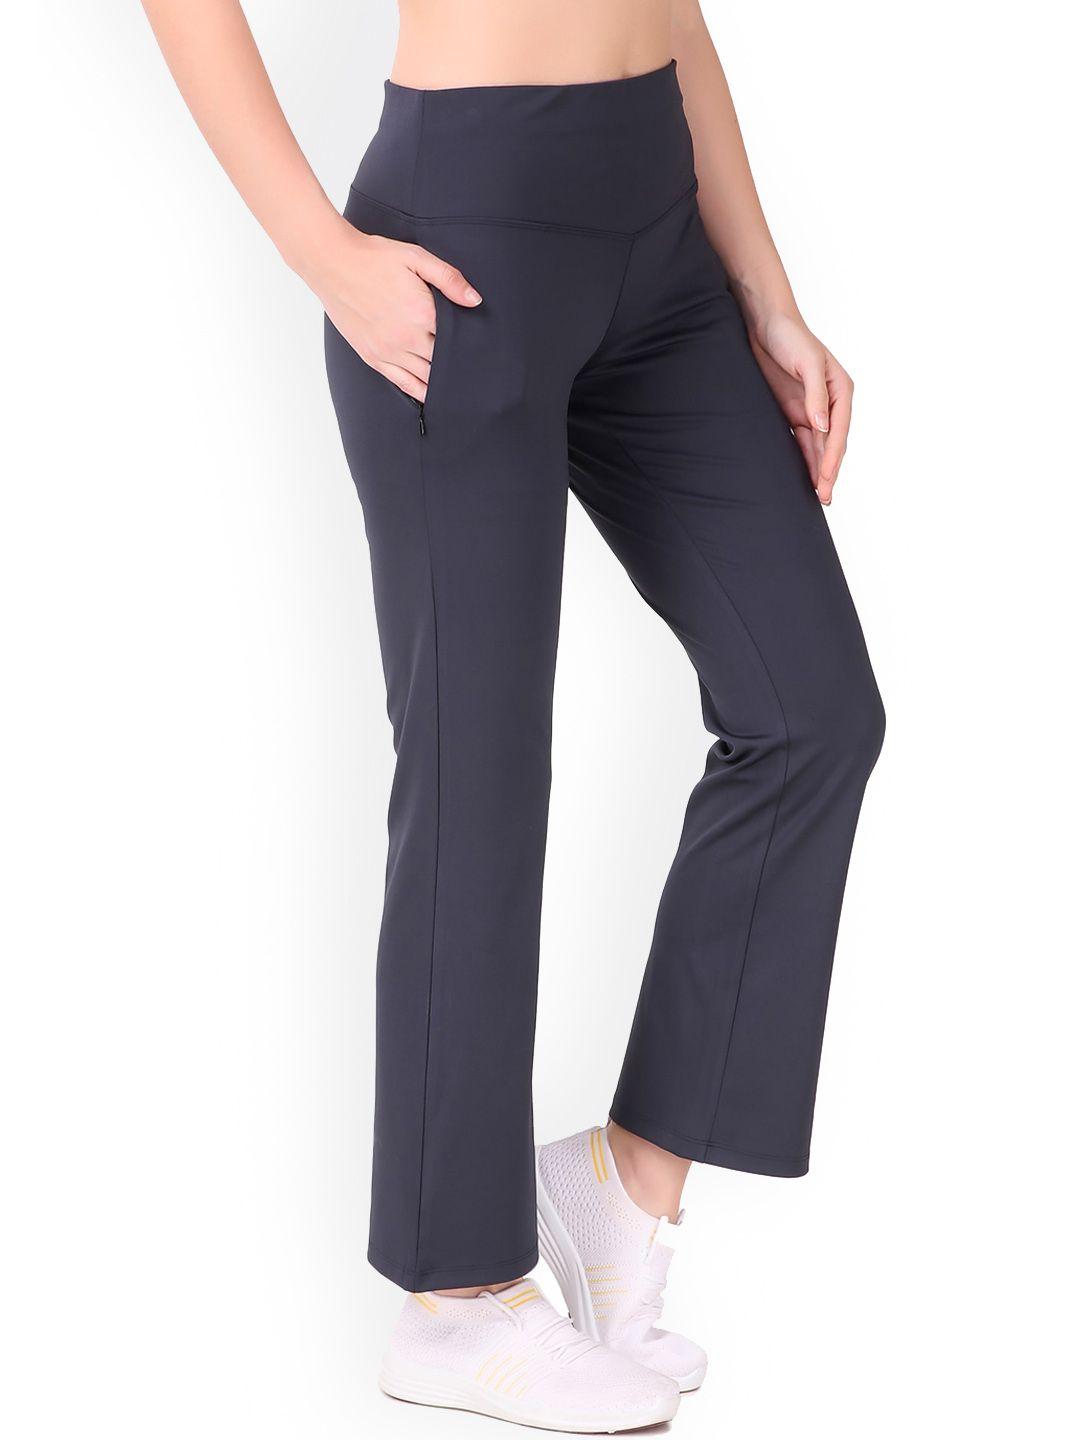 REDESIGN Women Mid-Rise Bootcut Dry-Fit Yoga Track Pant